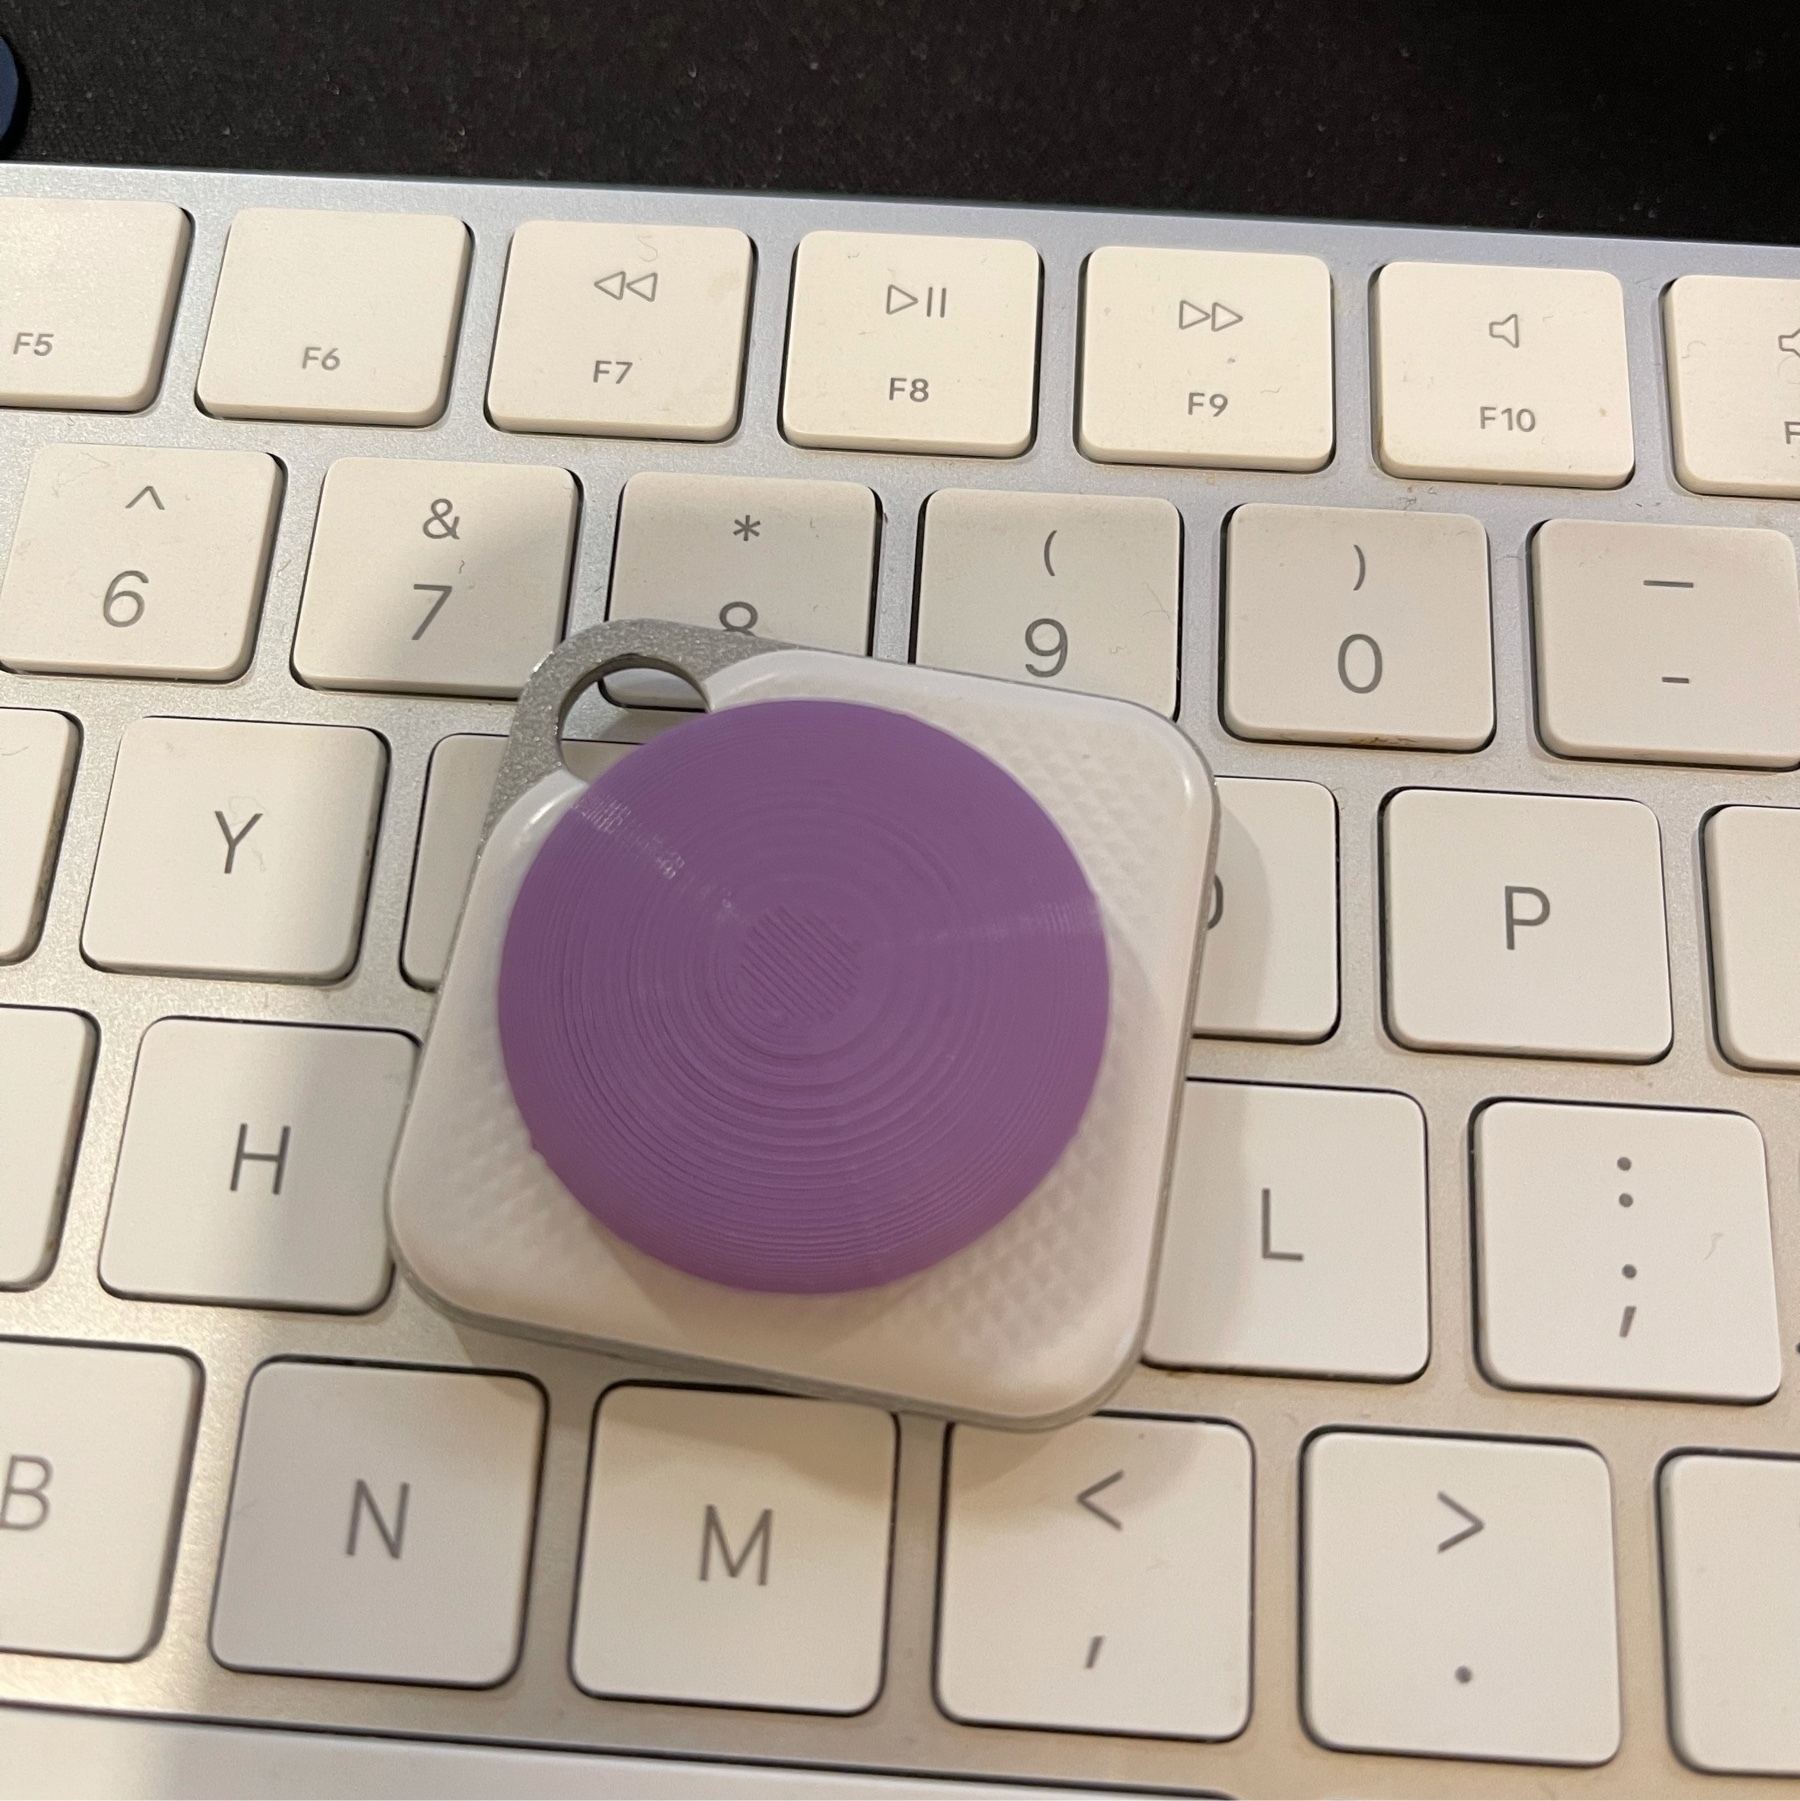 lilac "airtag" on a white Tile tracker on an apple keyboard. 